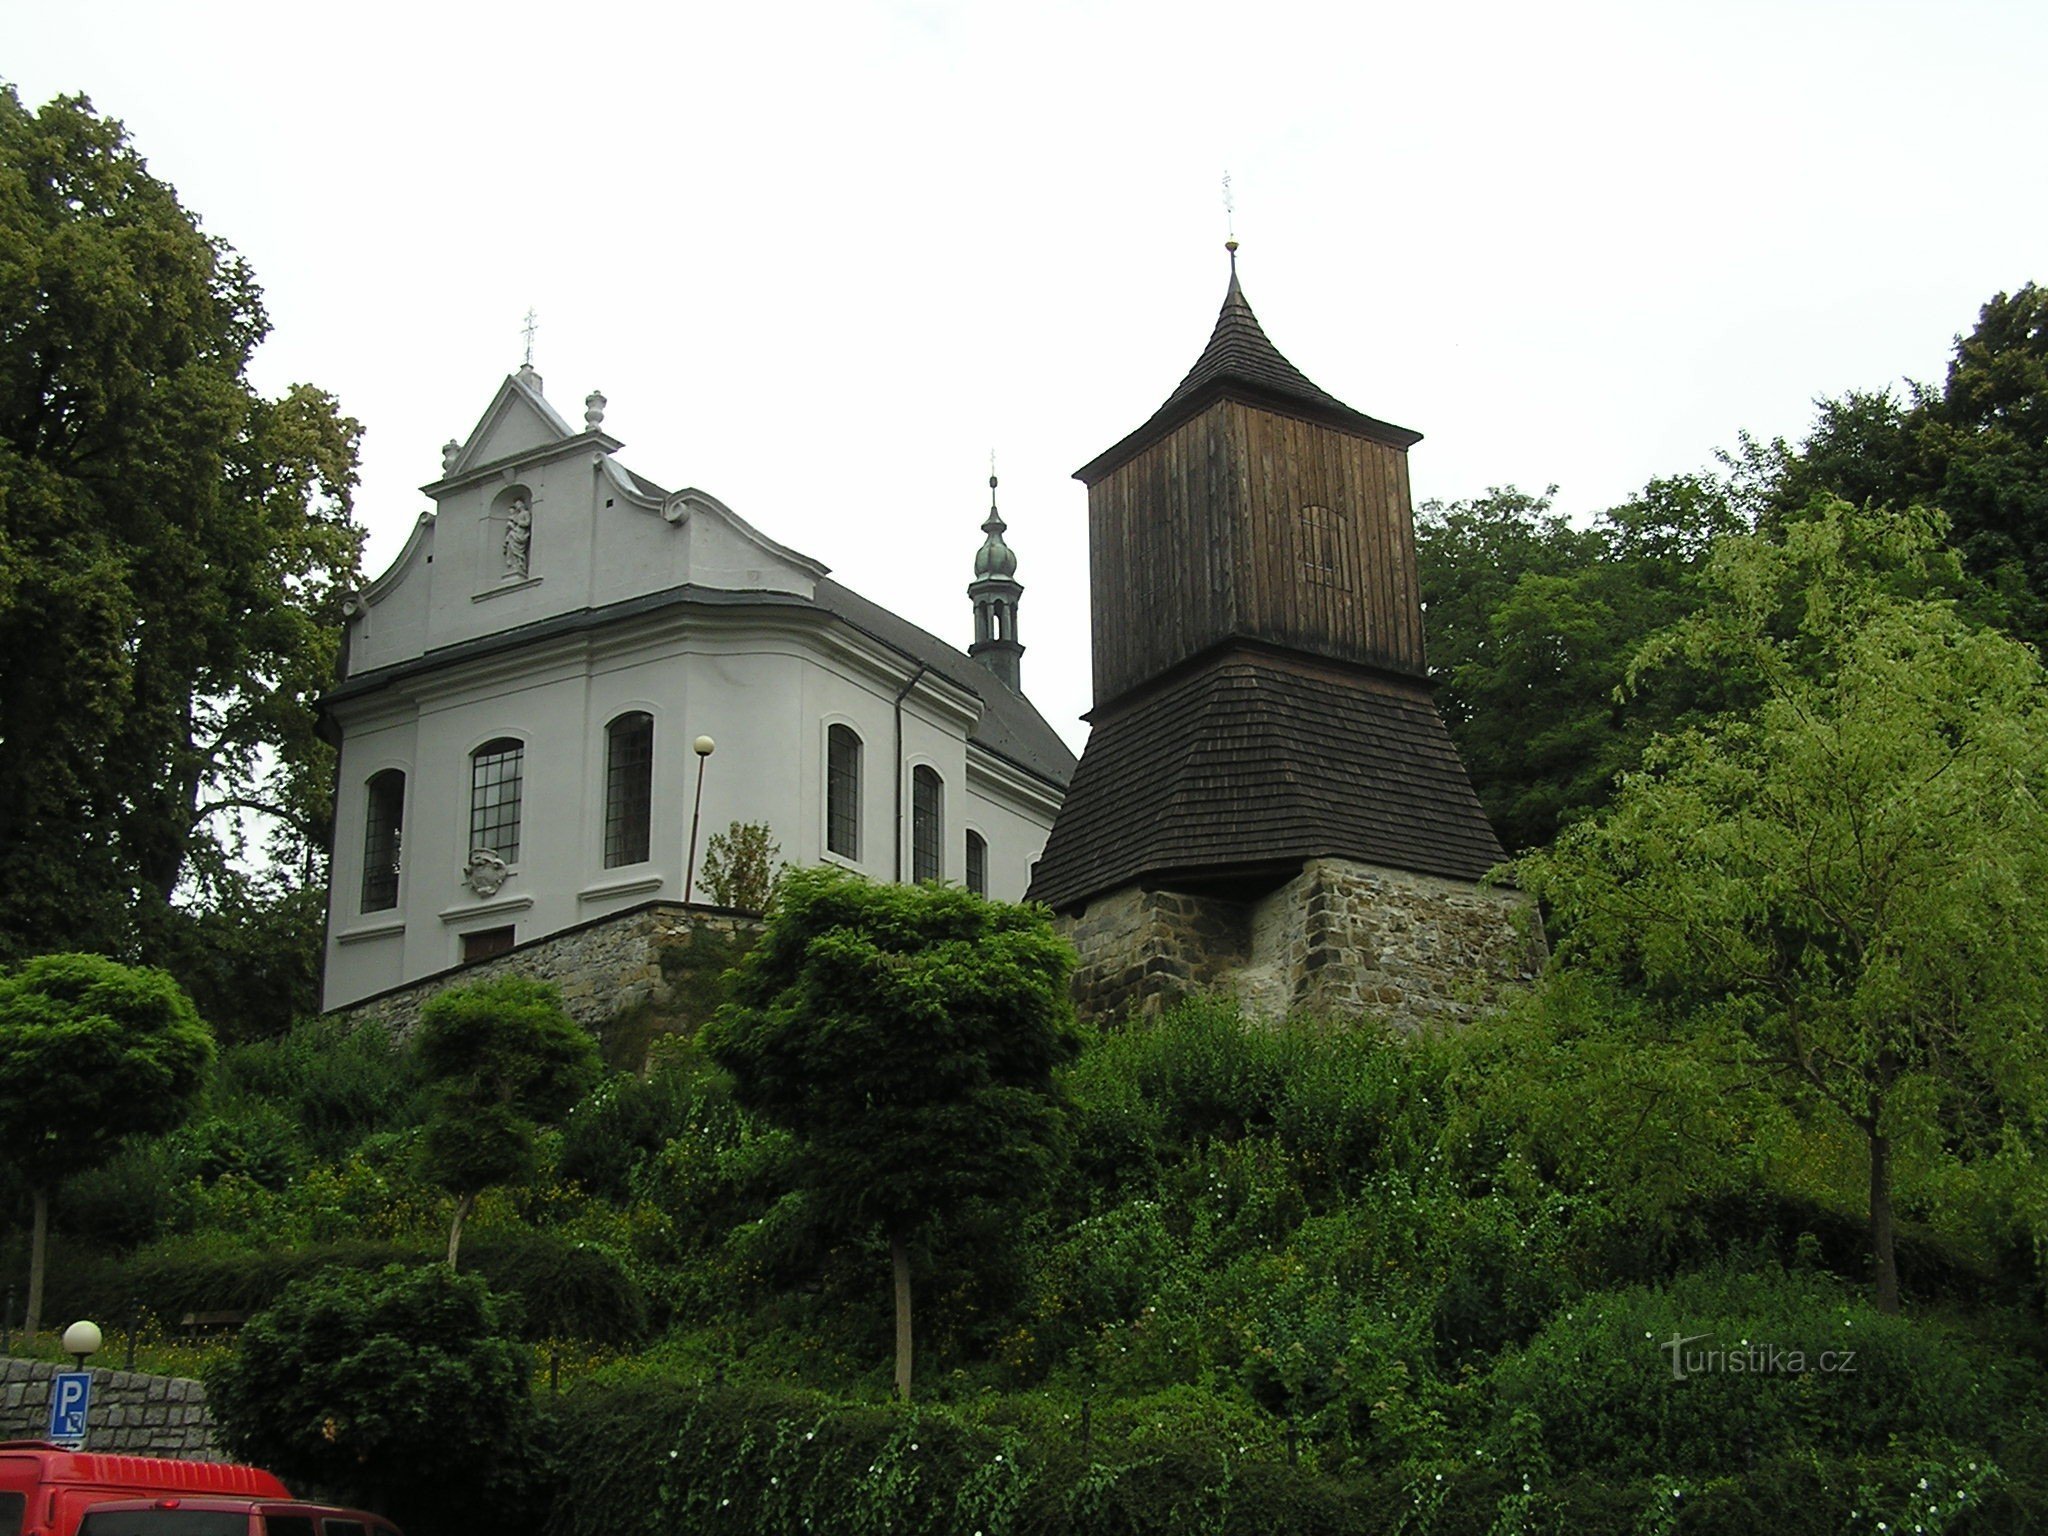 Temple of St. Jacob with the belfry 7/2015